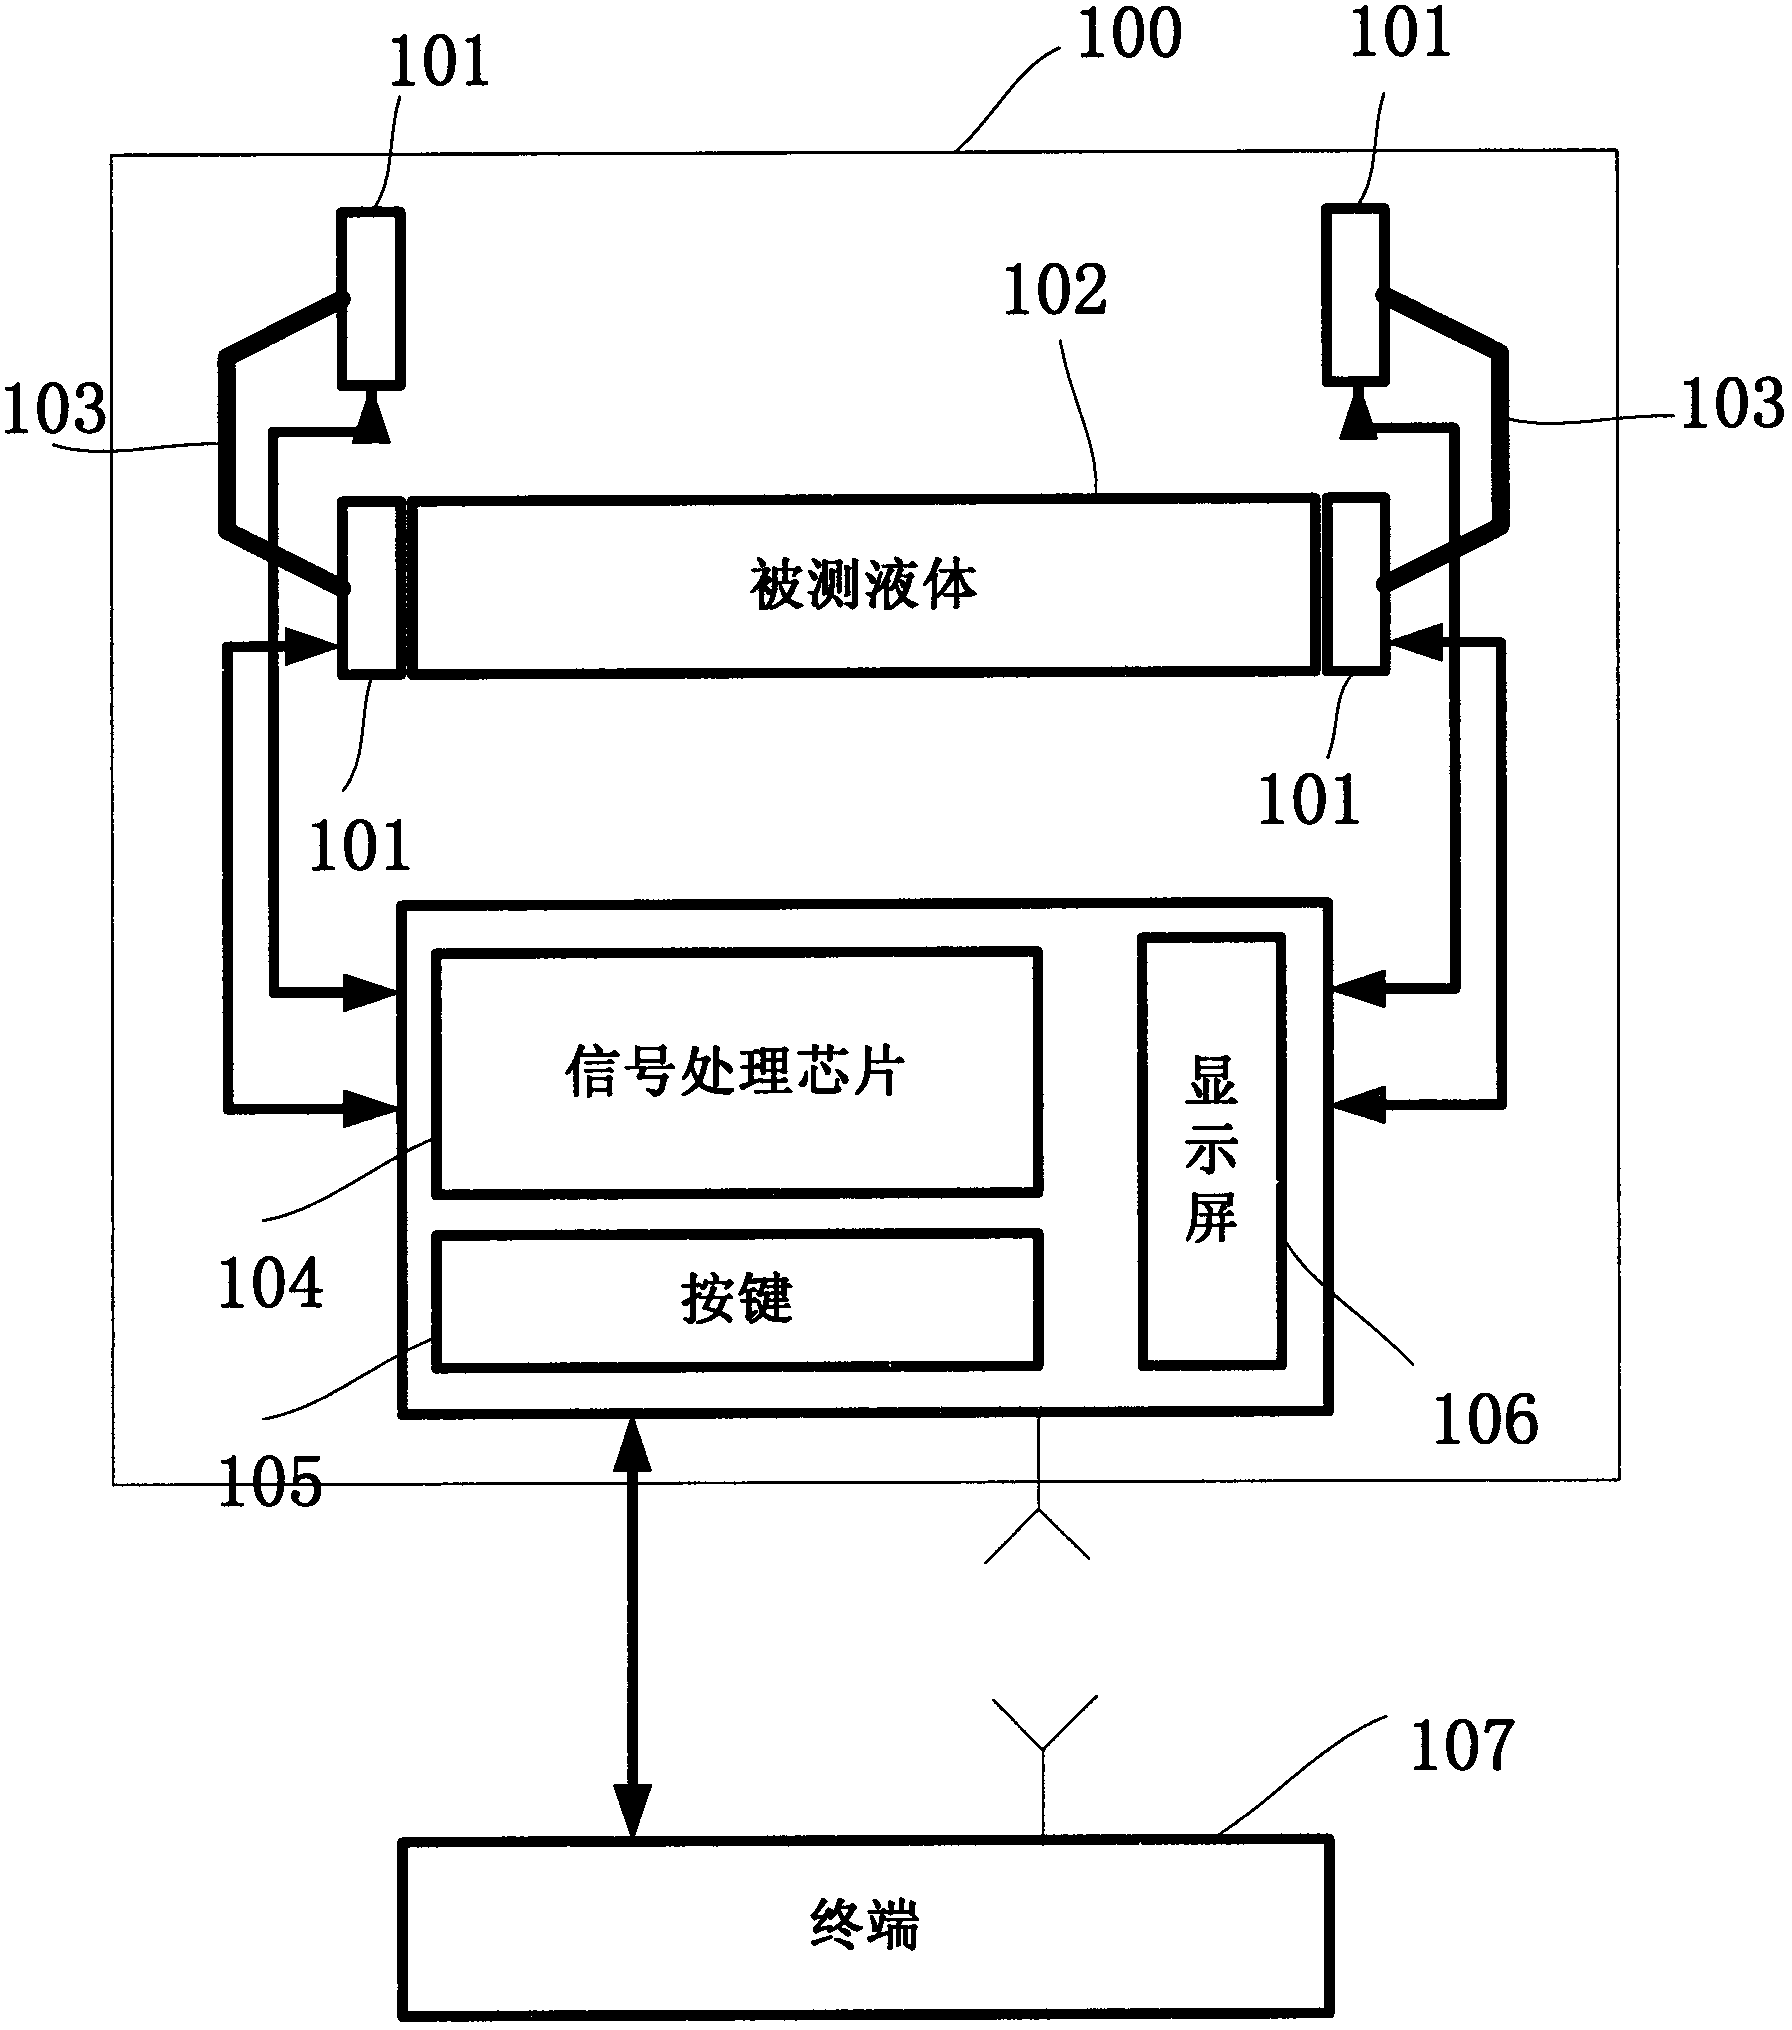 High-precision ultrasonic liquid difference identification device for food safety